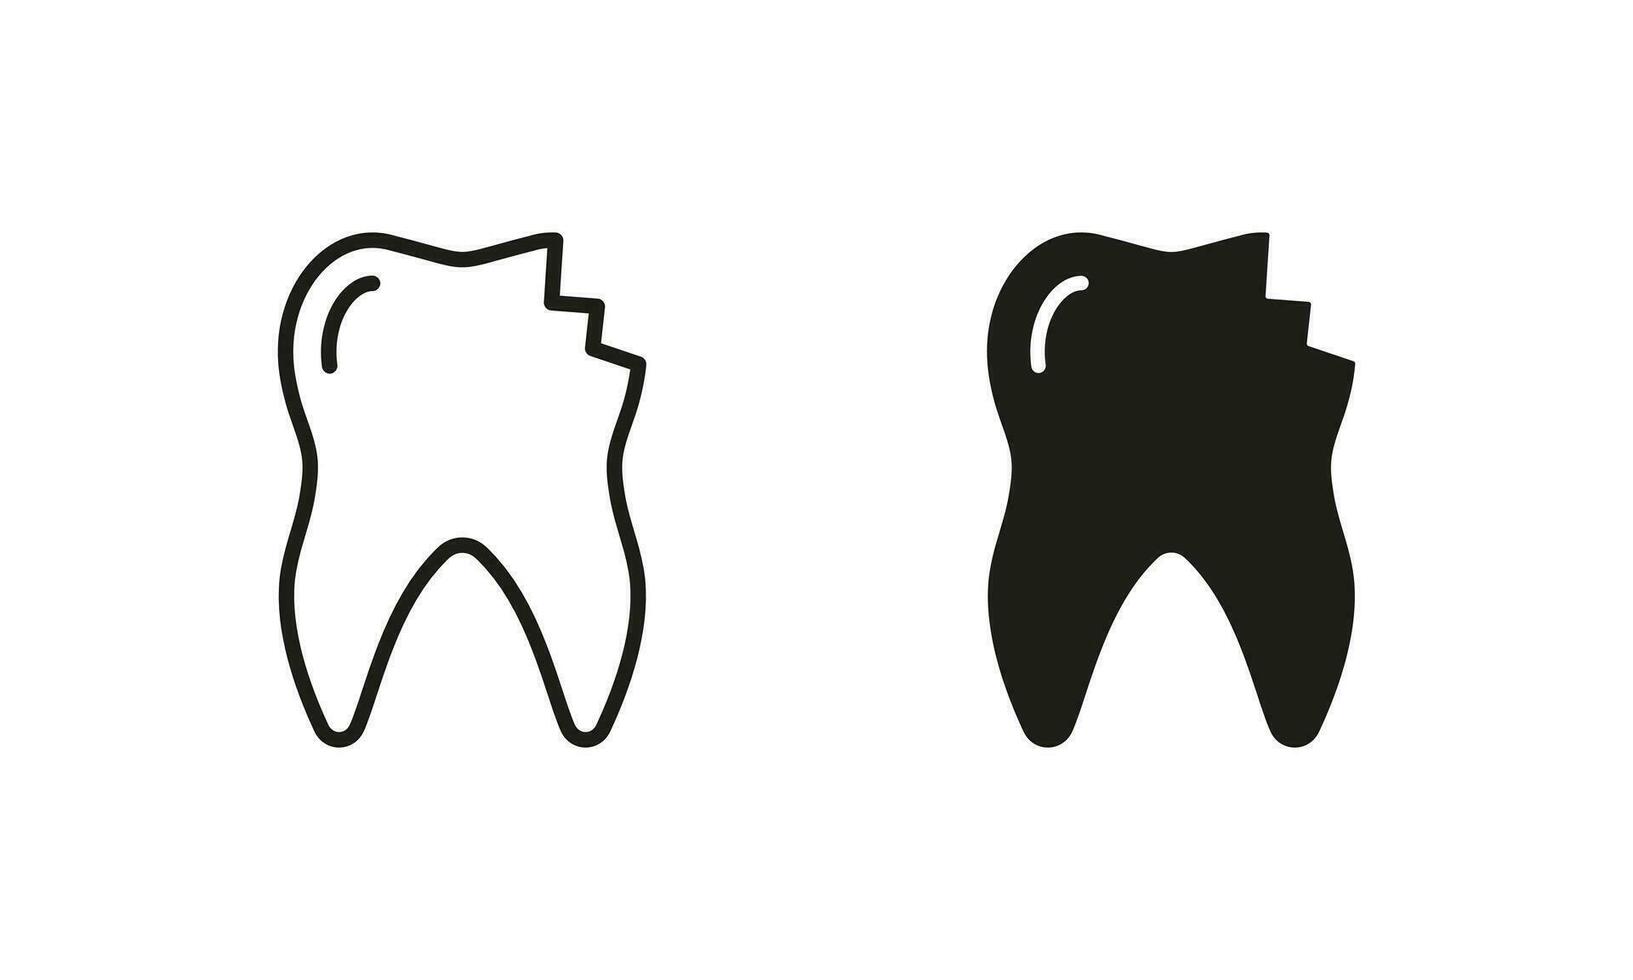 Broken Cracked Teeth Silhouette and Line Icons Set. Chipped Tooth Pictogram. Damaged Enamel, Medical Dental Problem Sign. Dentistry Black Symbol Collection. Isolated Vector Illustration.